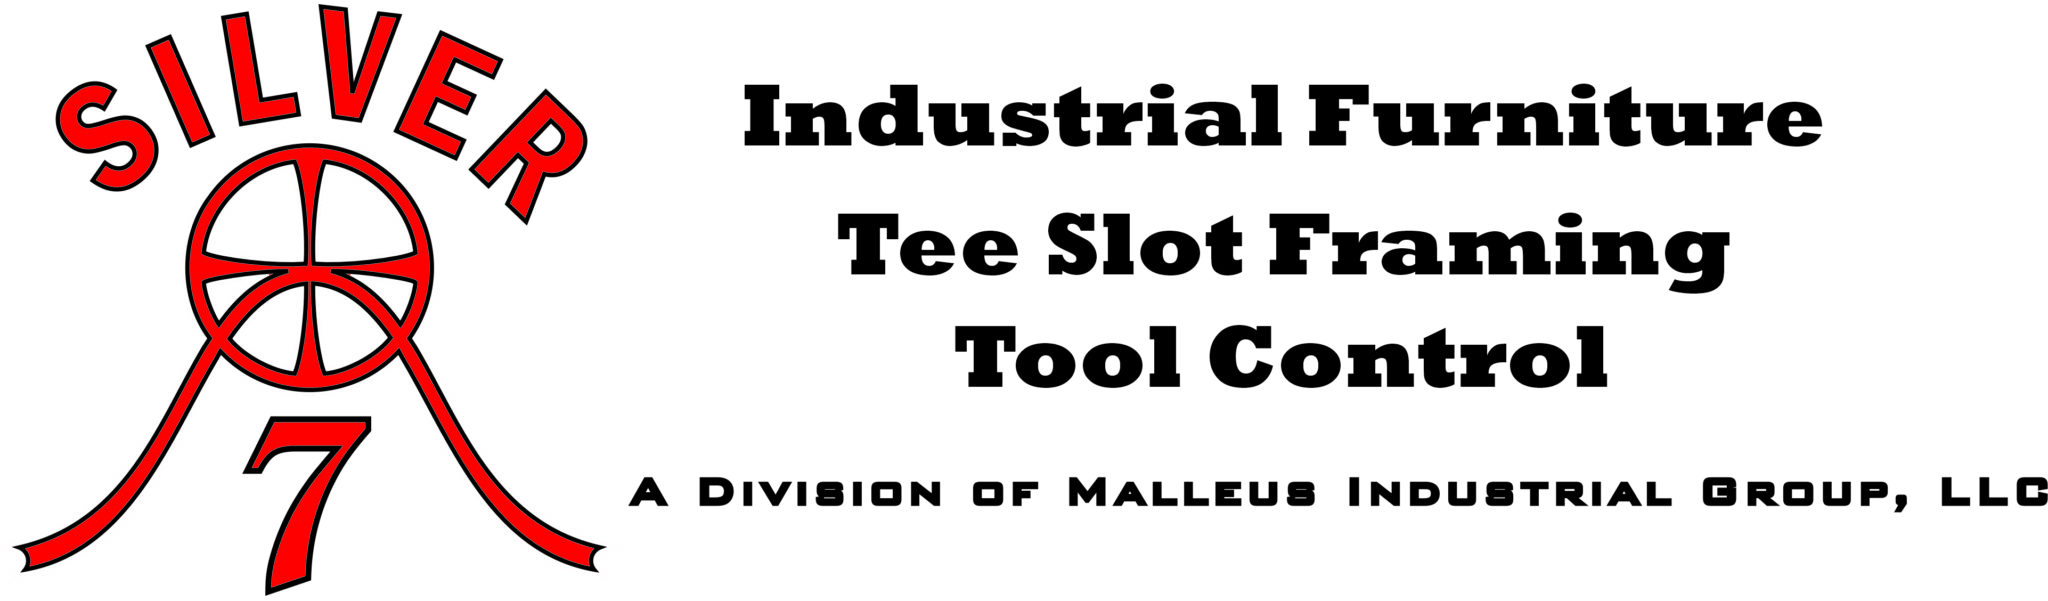 Silver 7 Malleus Industrial Group Industrial Furniture Logo Flat Image NEW